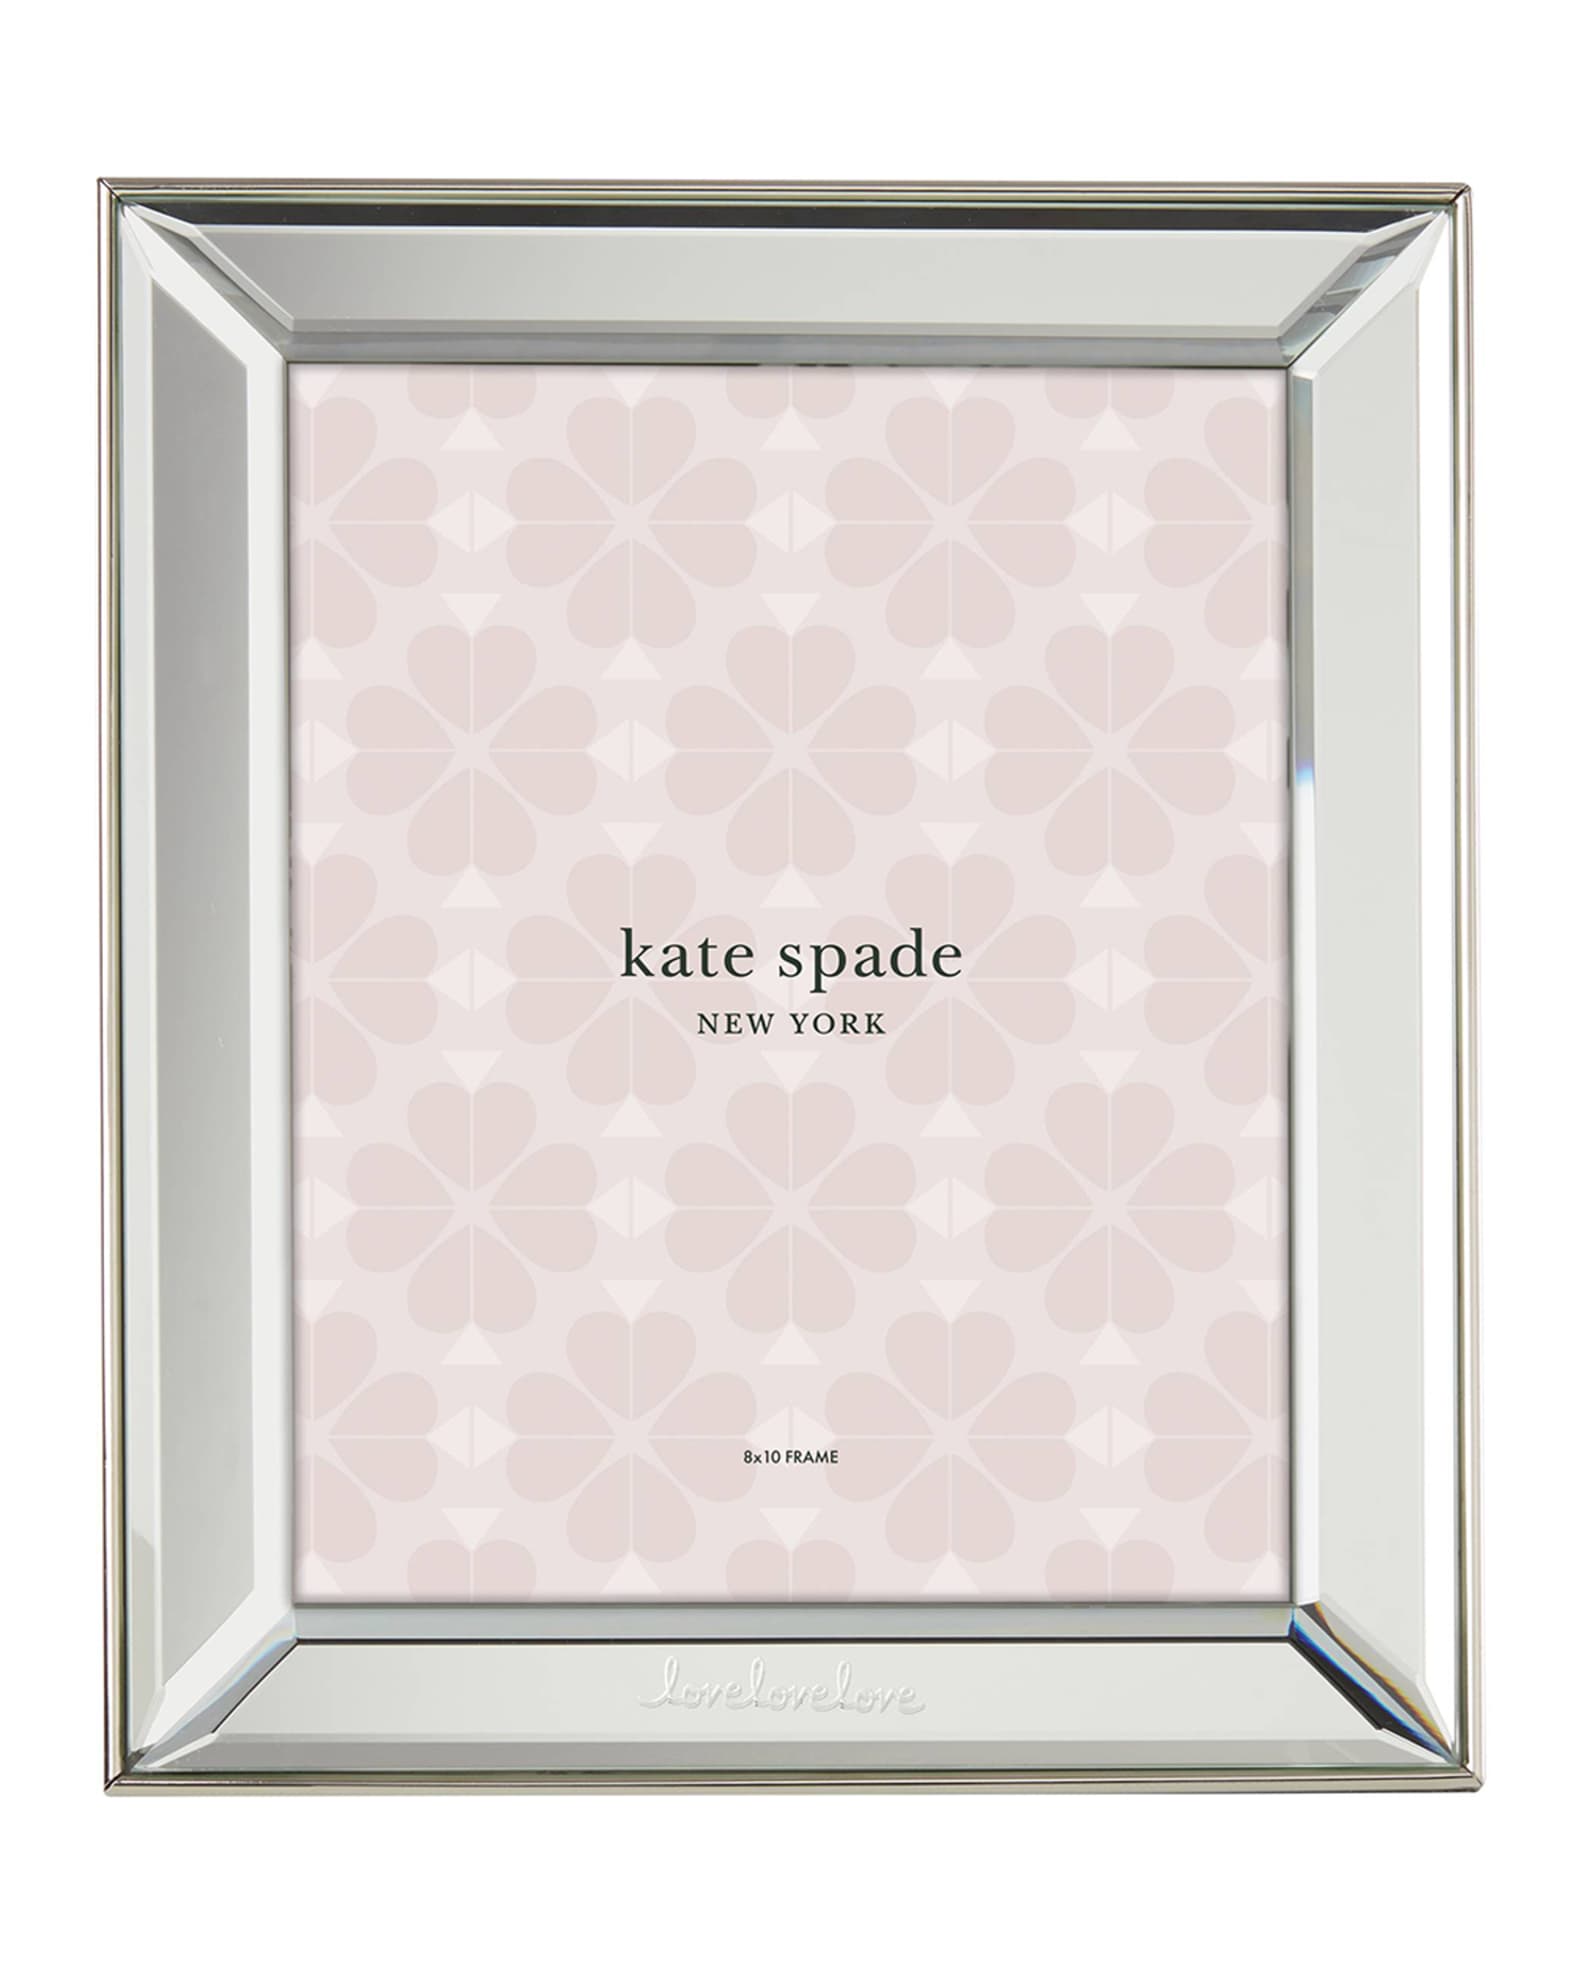 kate spade new york key court 8" x 10" picture frame